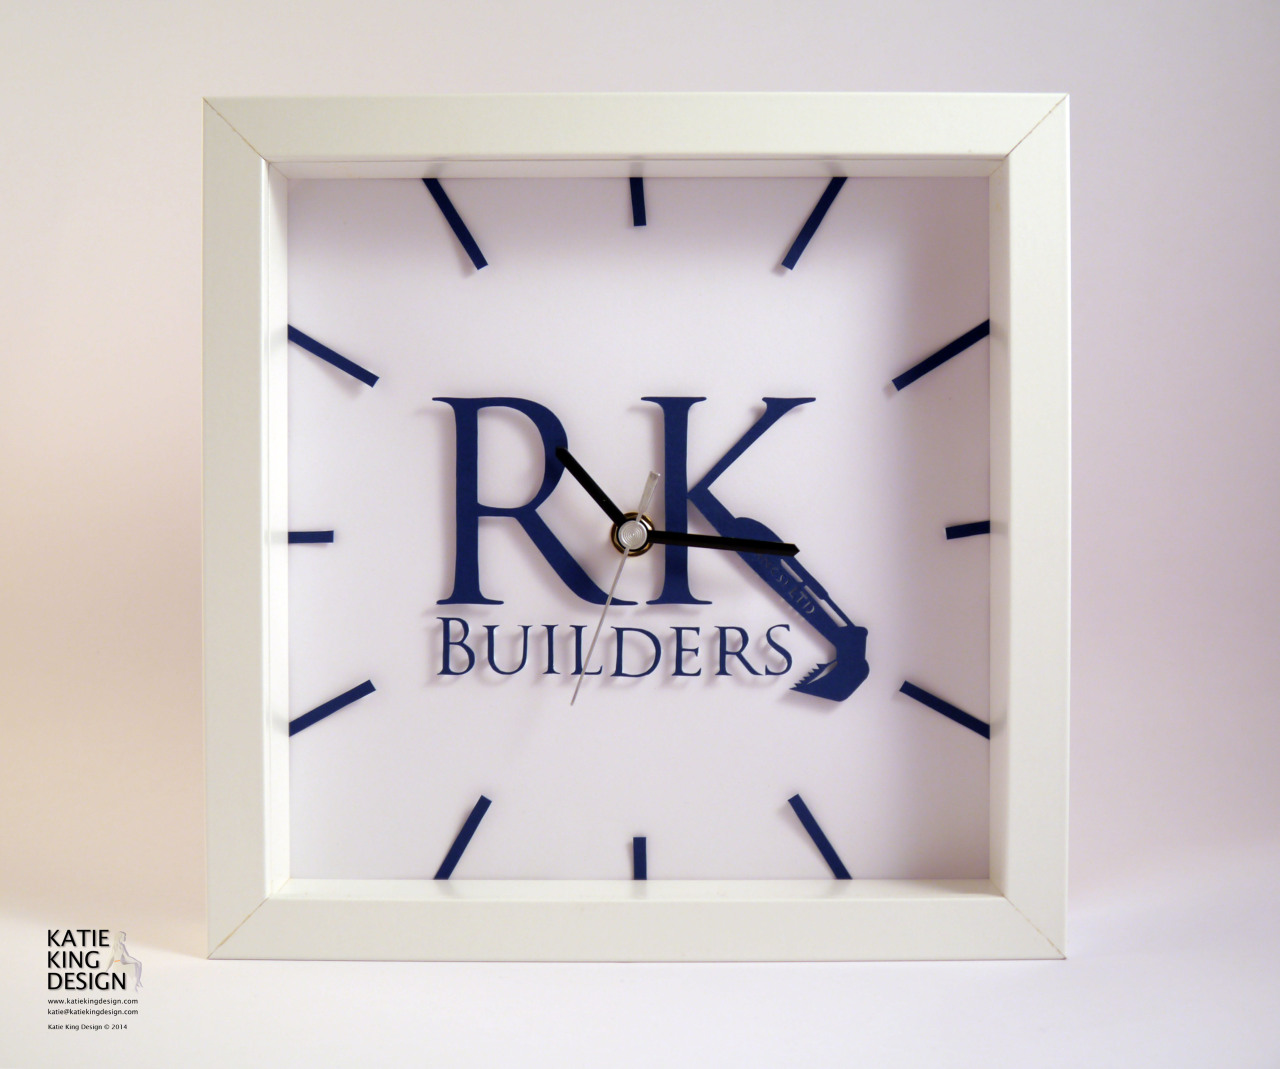 Katie King Design Hand Made Paper Cut Clock And Logo Design For Rk